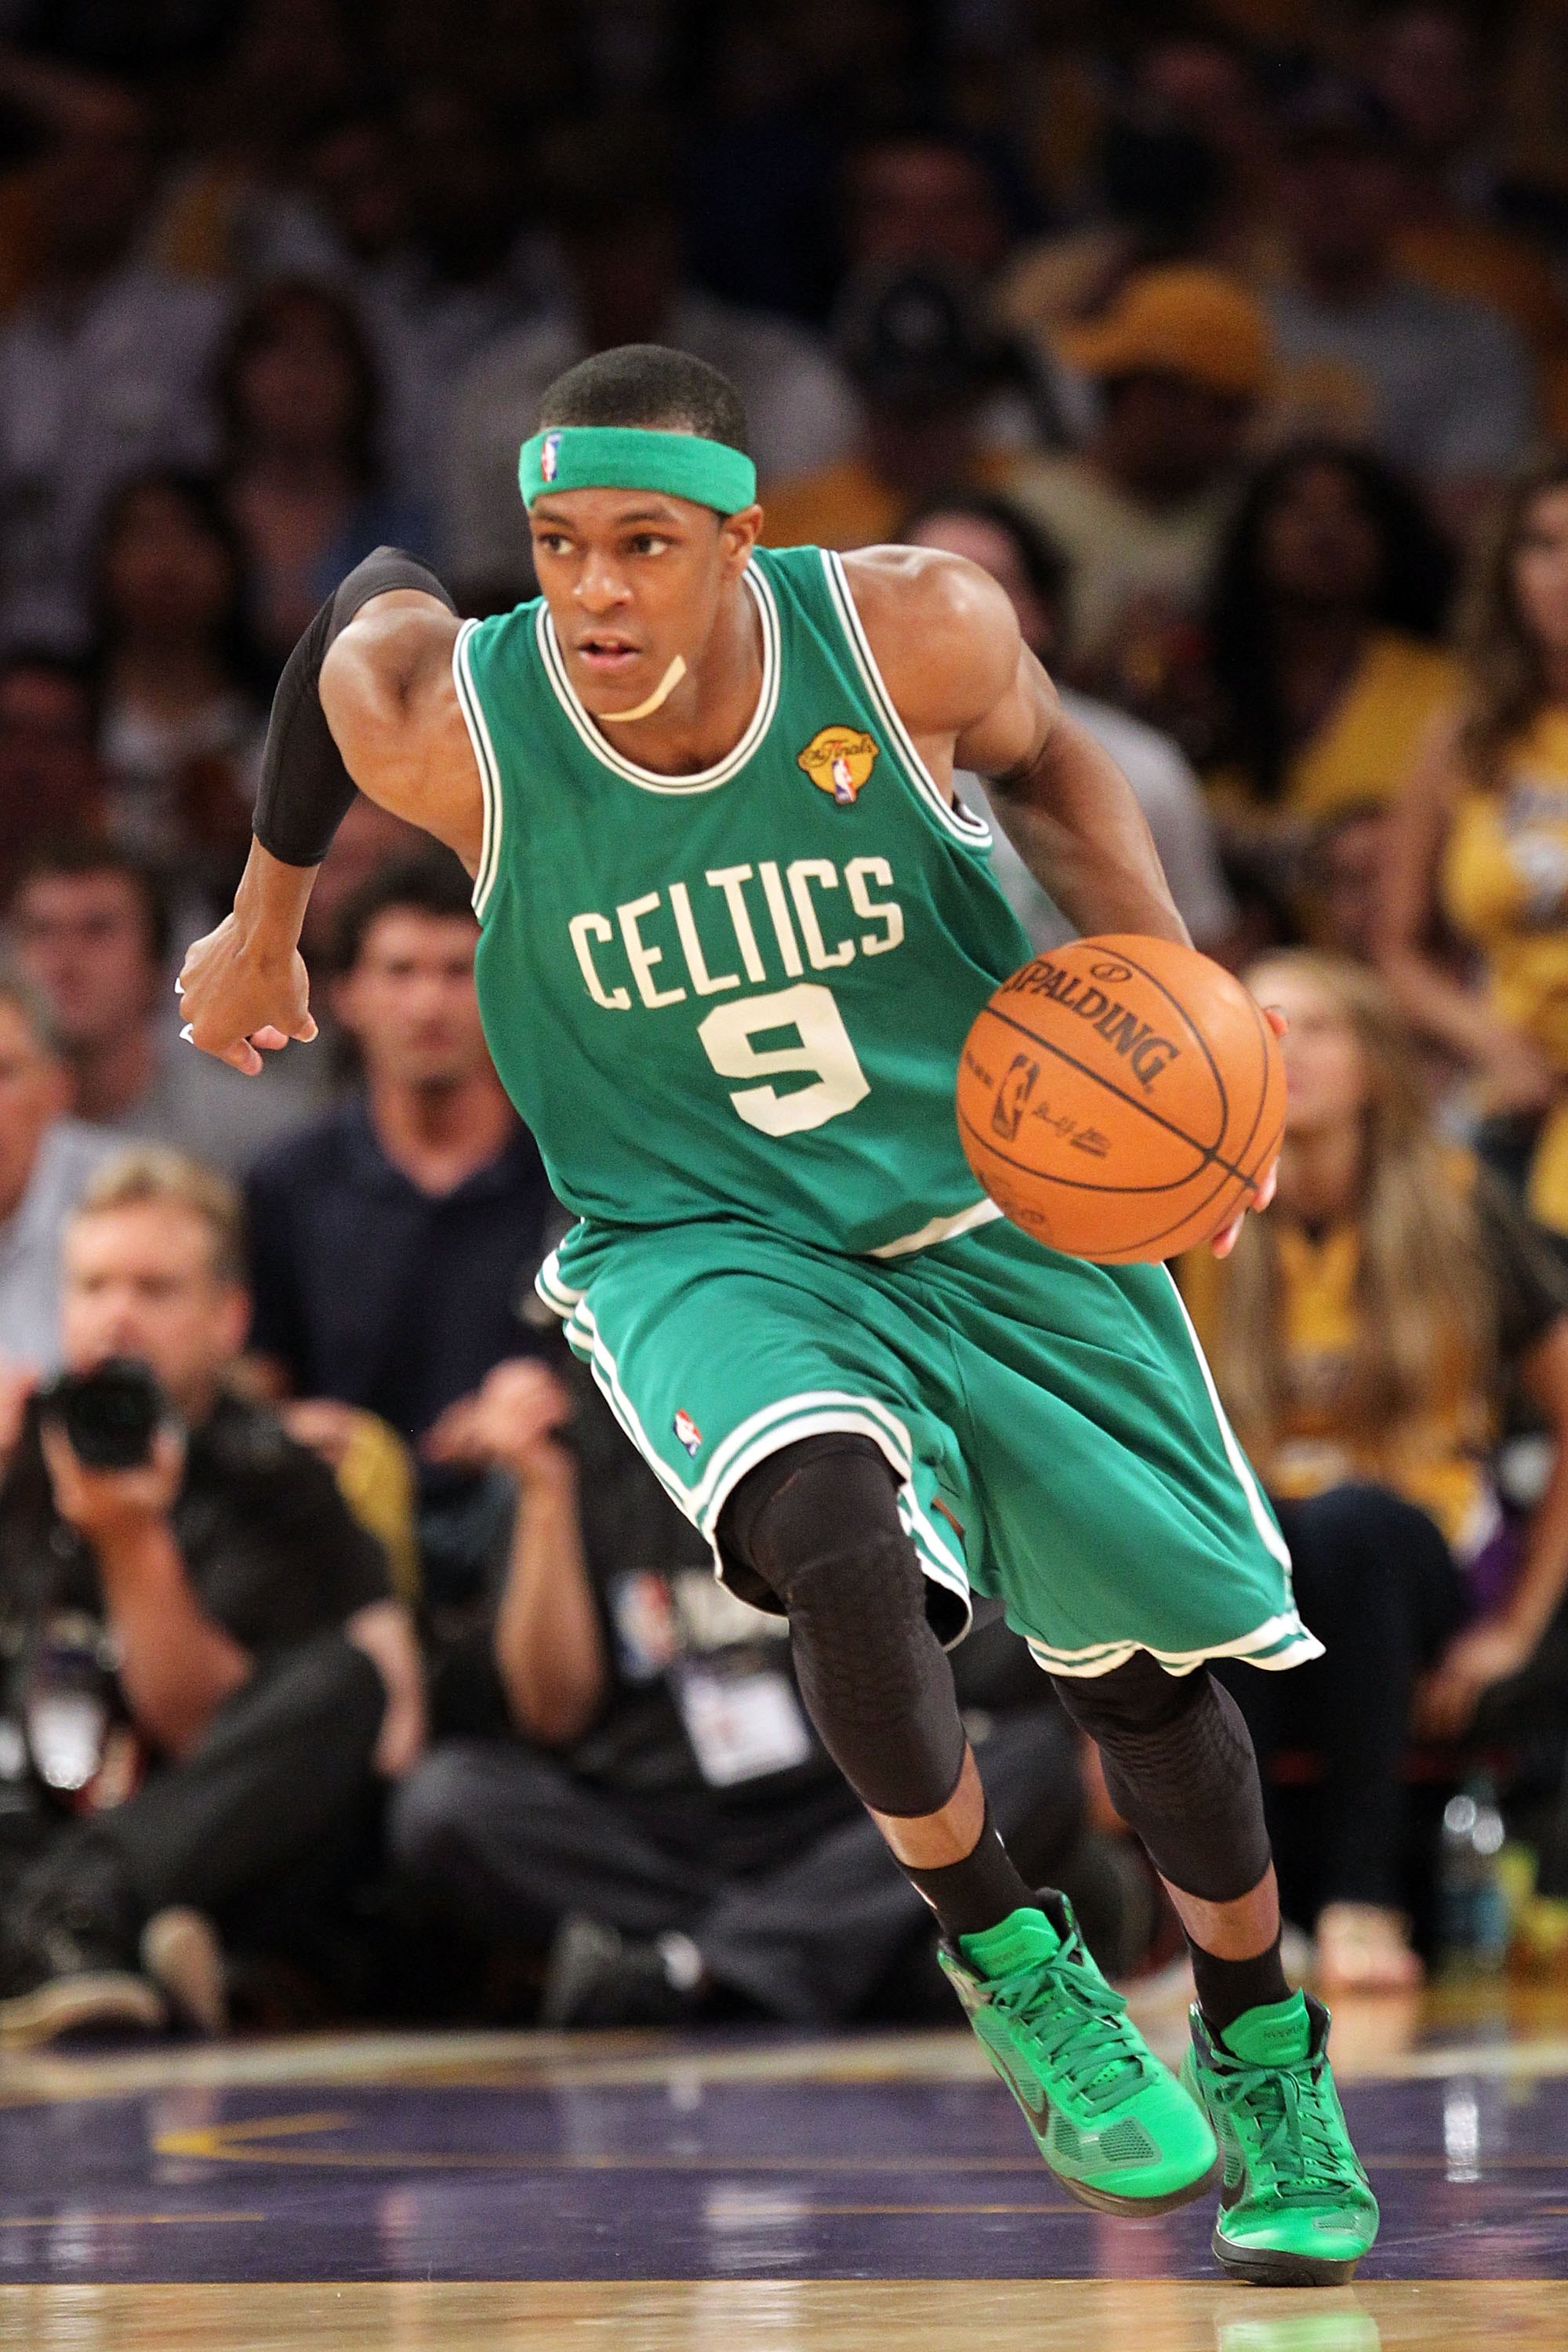 Rajon Rondo has an arsenal of dribble moves including the crossover.